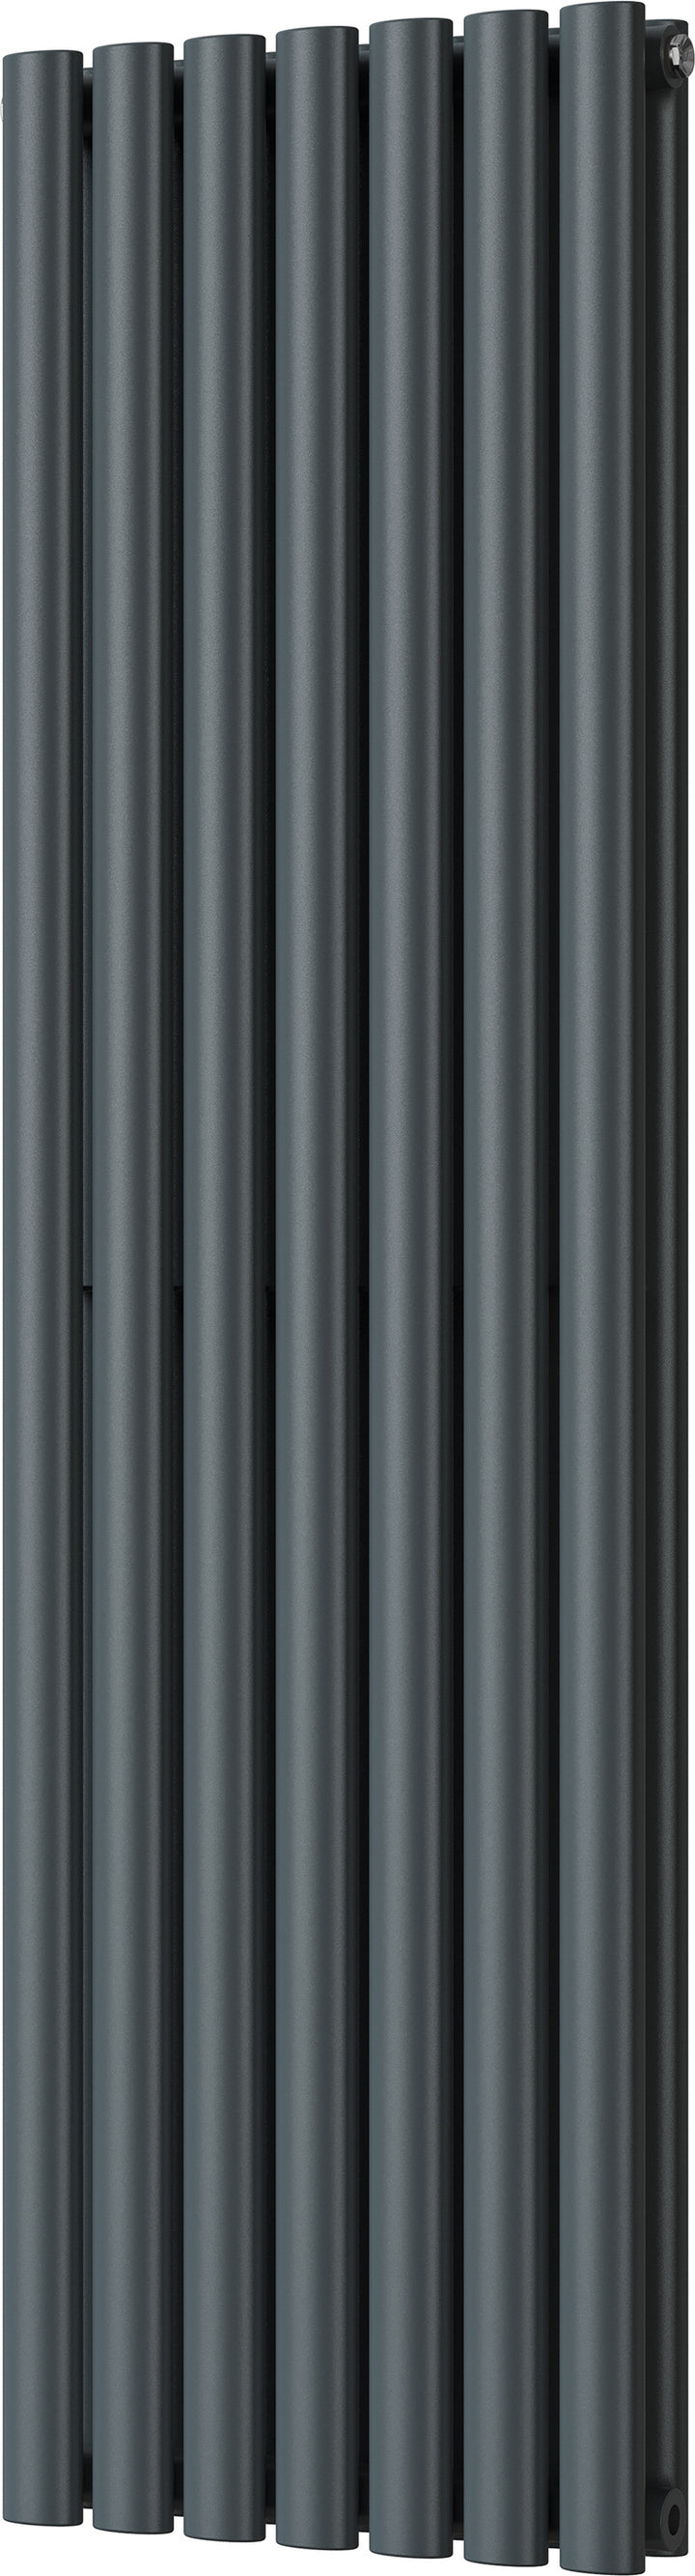 Omeara - Anthracite Vertical Radiator H1400mm x W406mm Double Panel